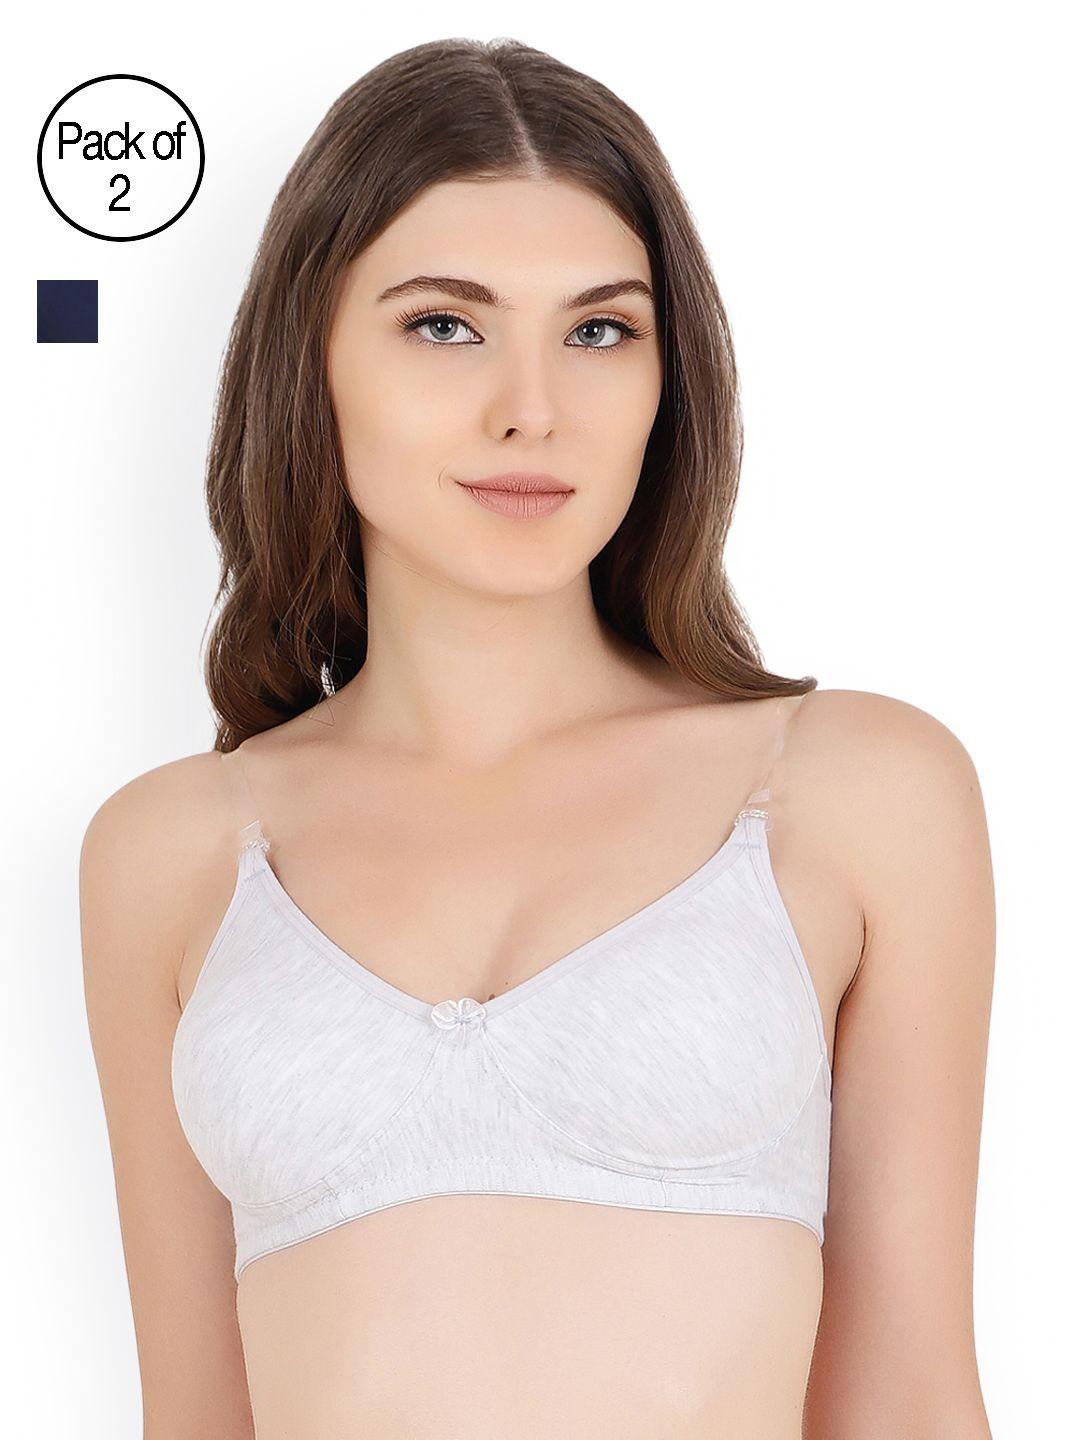 floret pack of two solid non-wired non padded t-shirt bra daina_n.blue-cool grey_40b